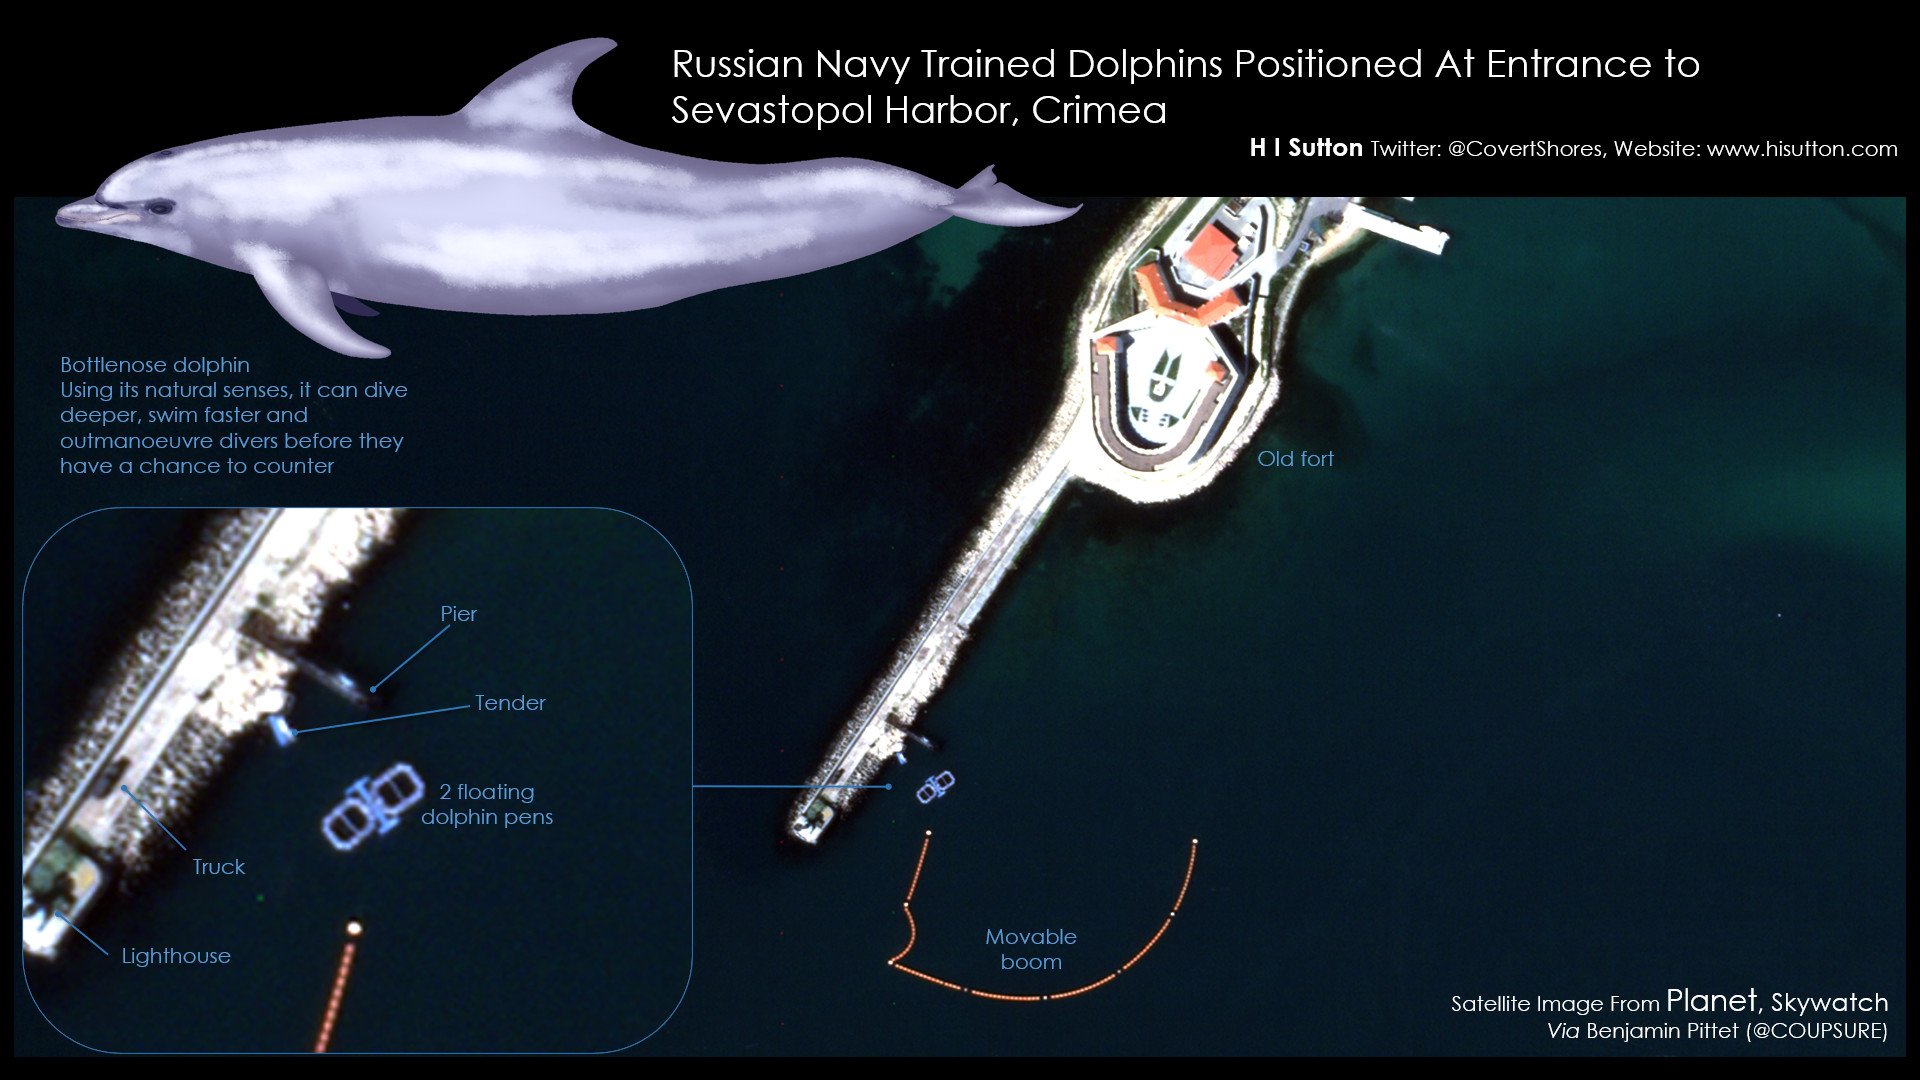 Russia-Ukraine conflict: Russia deploys dolphins to protect a naval base in the Black Sea - Photo 1.